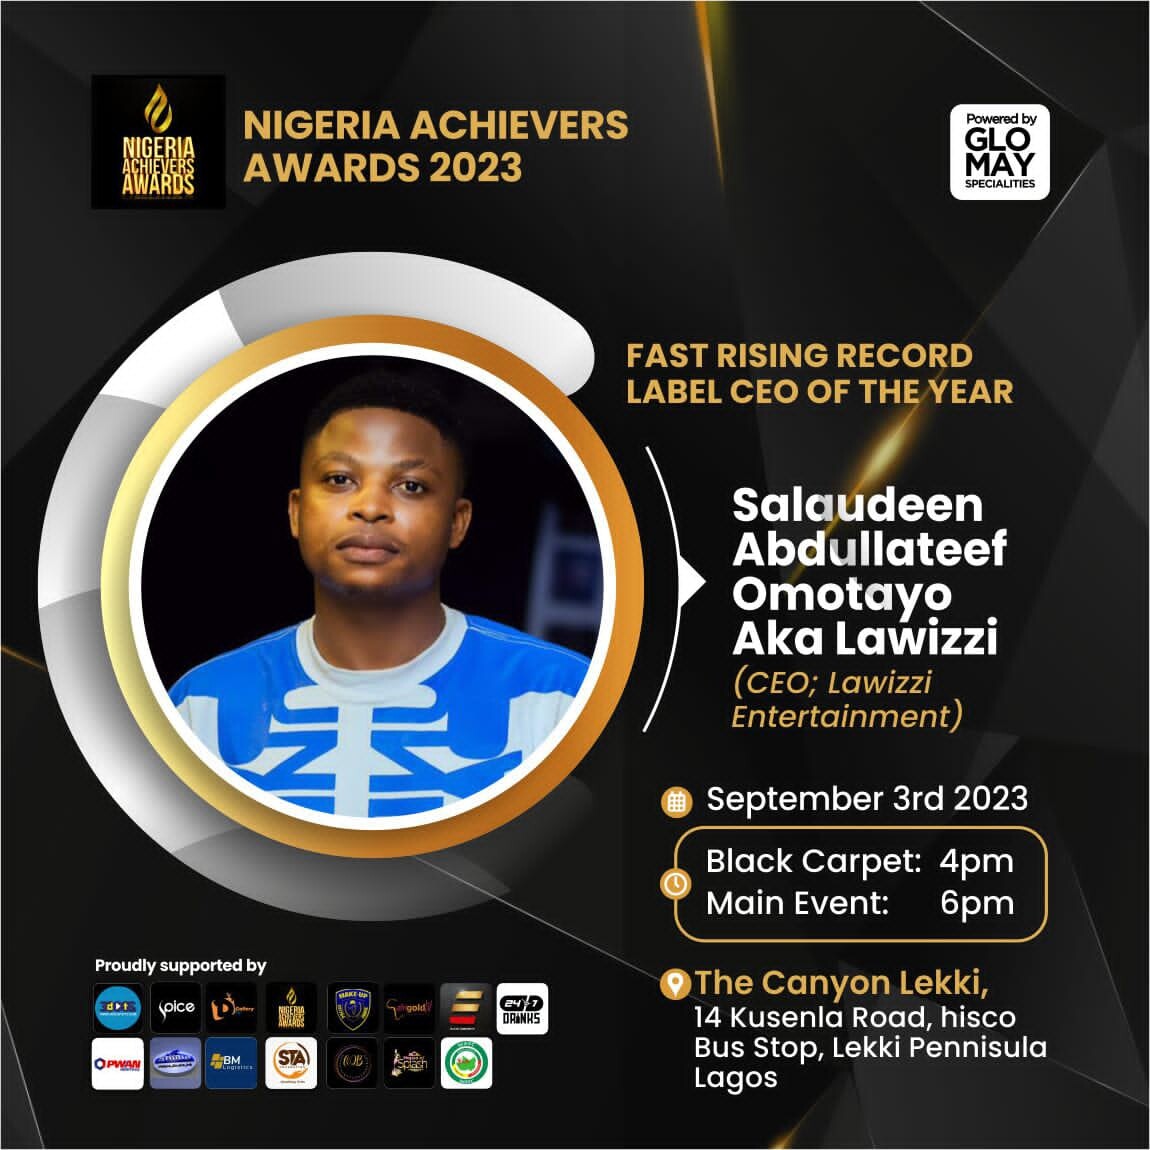 All hail Salaudeen CEO Lawizzi Entertainment as he is set to receive another accolades from Nigeria Achievers Award 2023